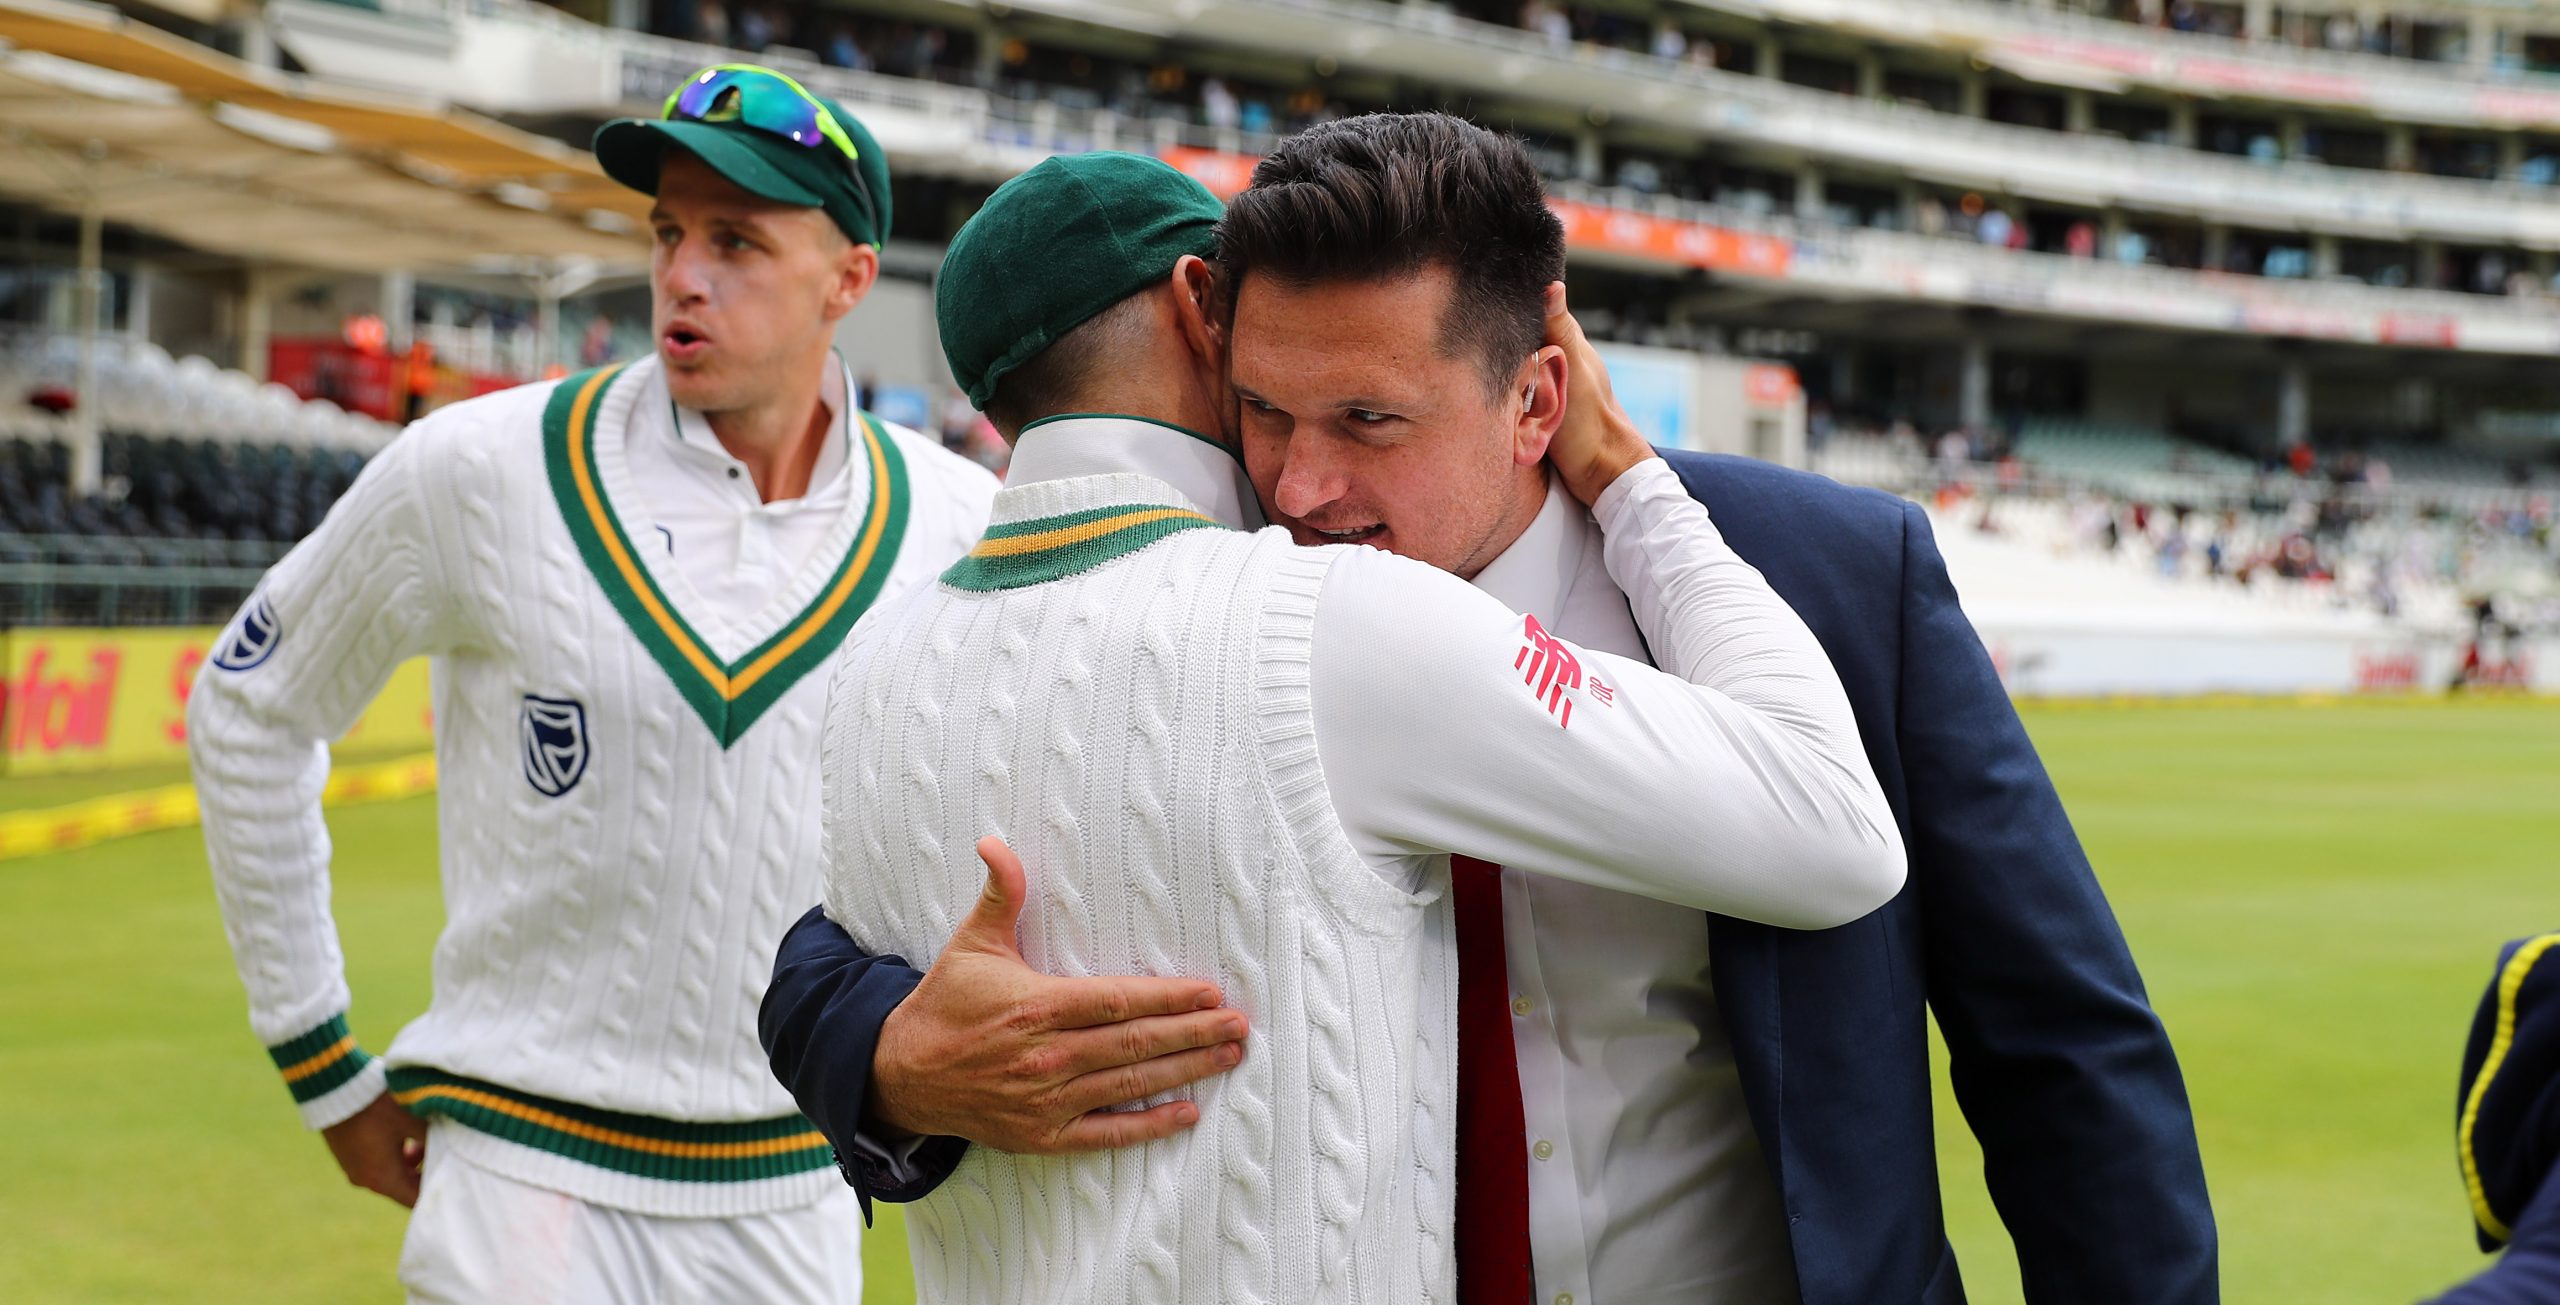 Graeme Smith on State of Cricket in SA